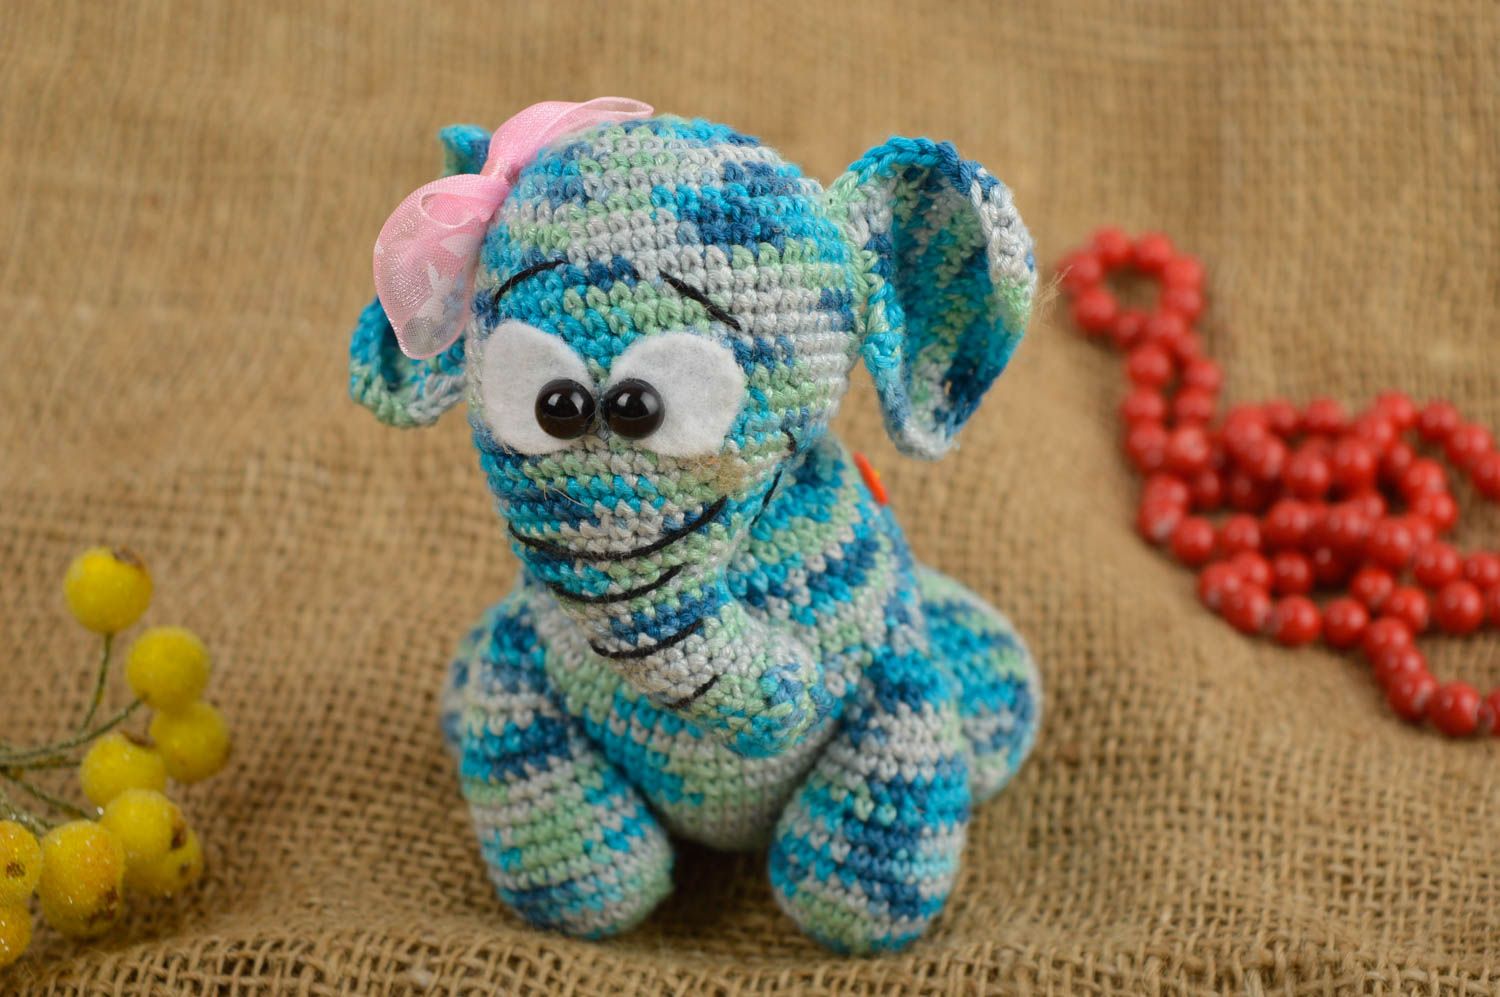 Knitted stuffed baby elephant toy in white and blue colors. 4 inches tall photo 1